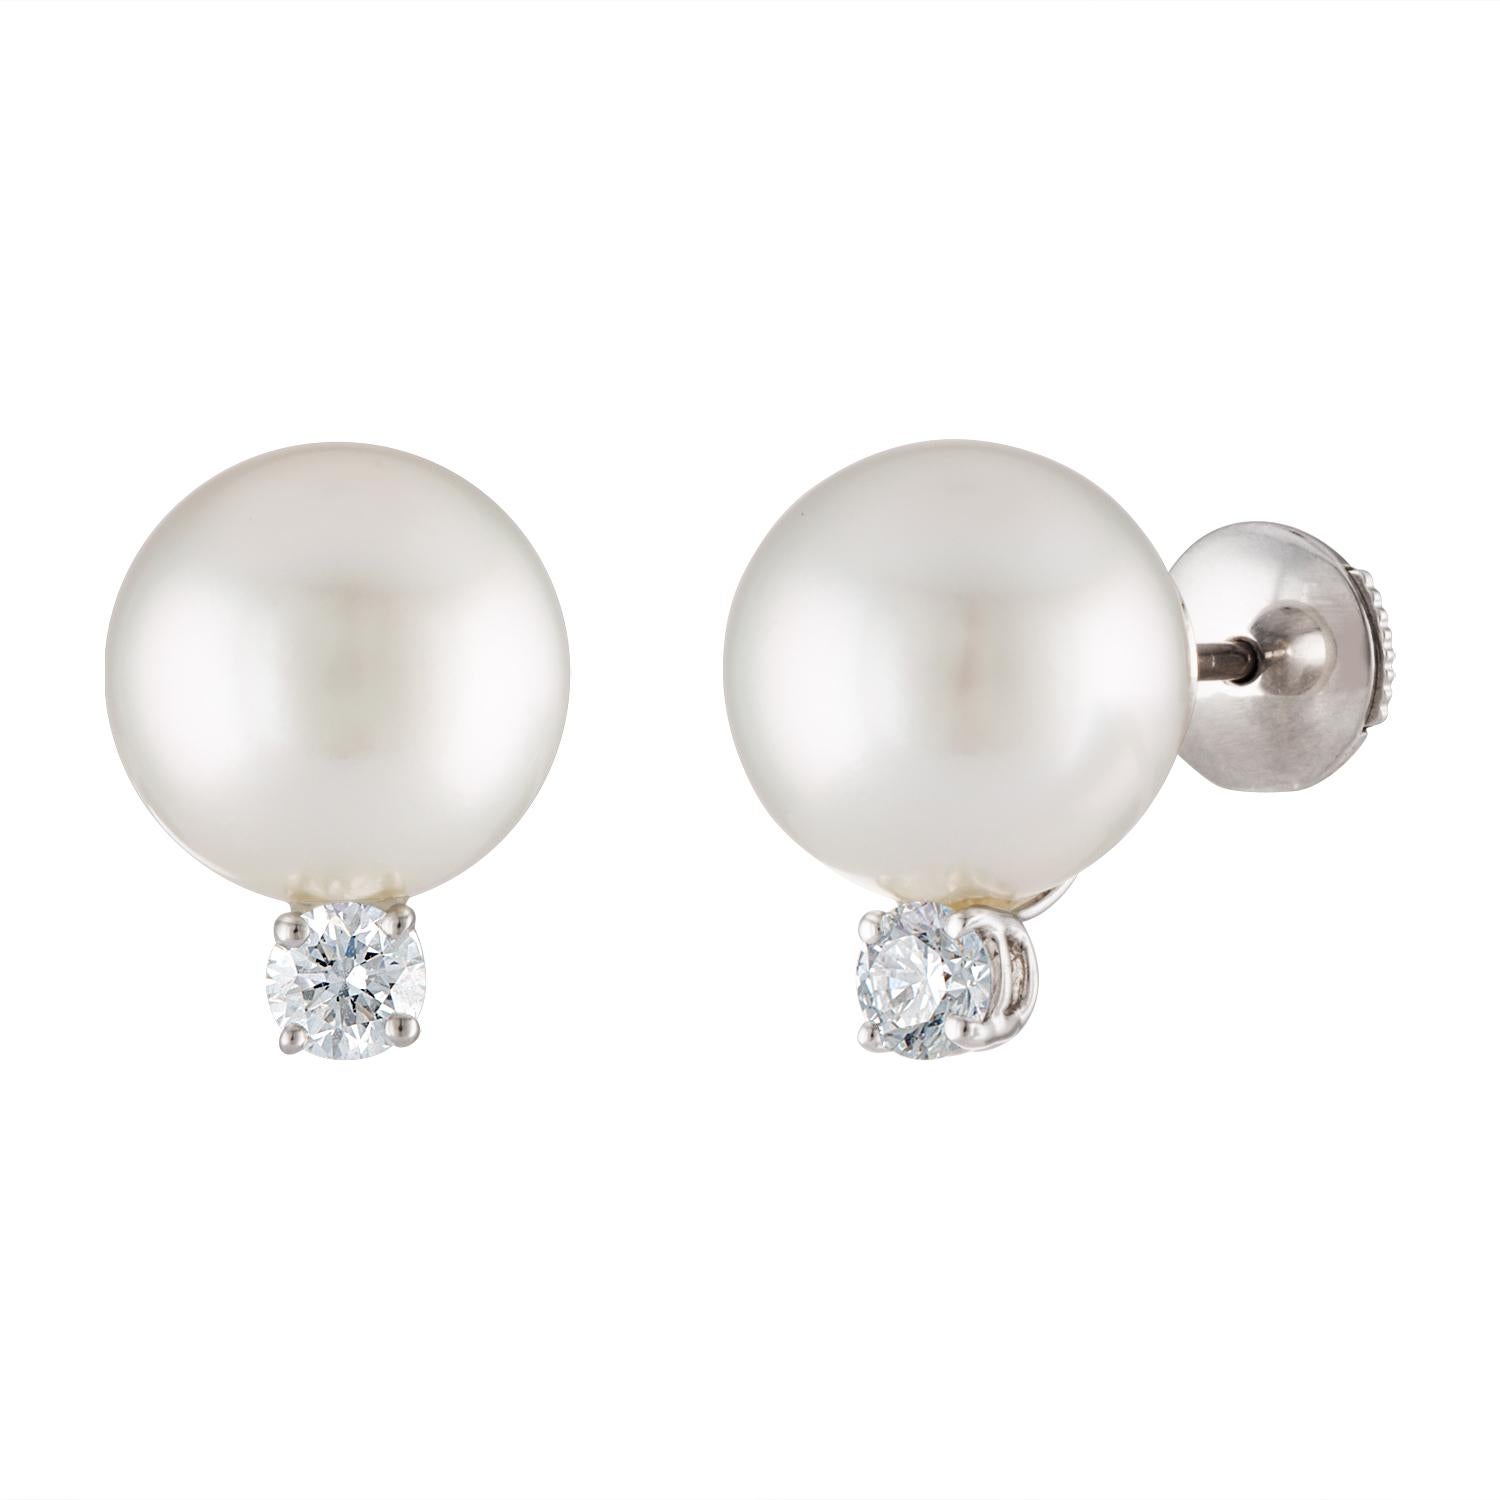 These elegant South Sea cultured pearl and diamond stud earrings consist of 11.7mm pearls set on 18 karat white gold accented by 0.49 carats total of sparkling diamonds.
These versatile earrings can be worn dressy or casual. They are a staple for